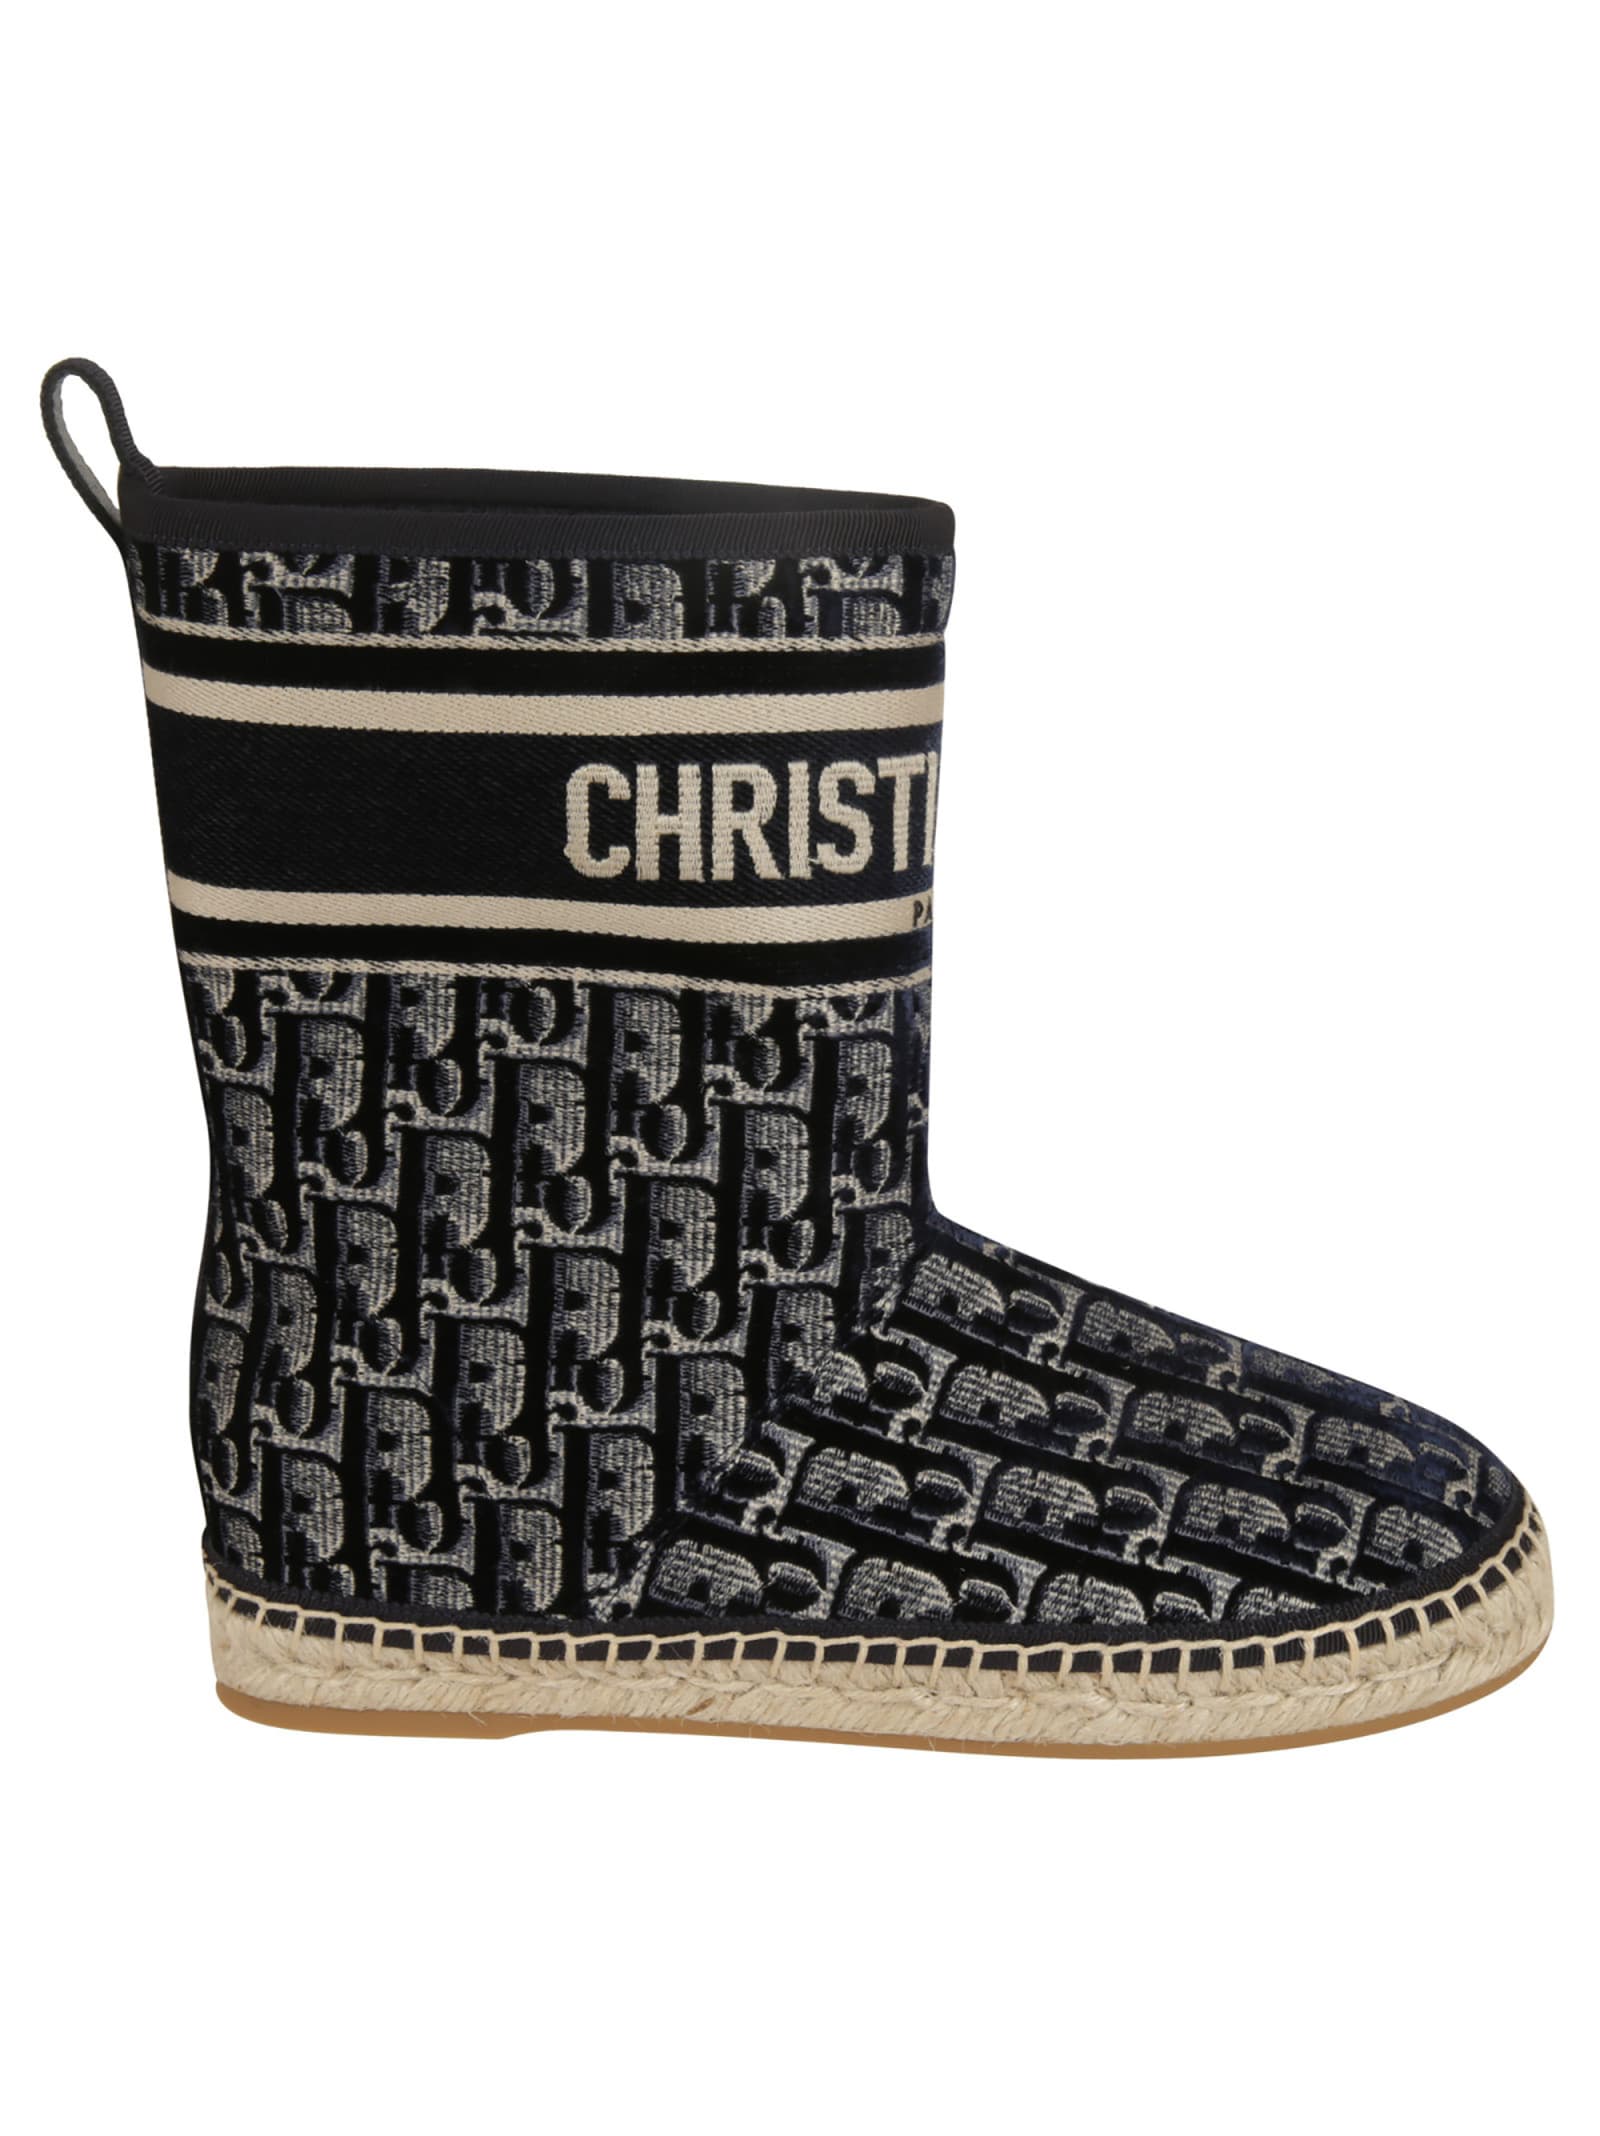 Buy Christian Dior Granville Boots online, shop Christian Dior shoes with free shipping